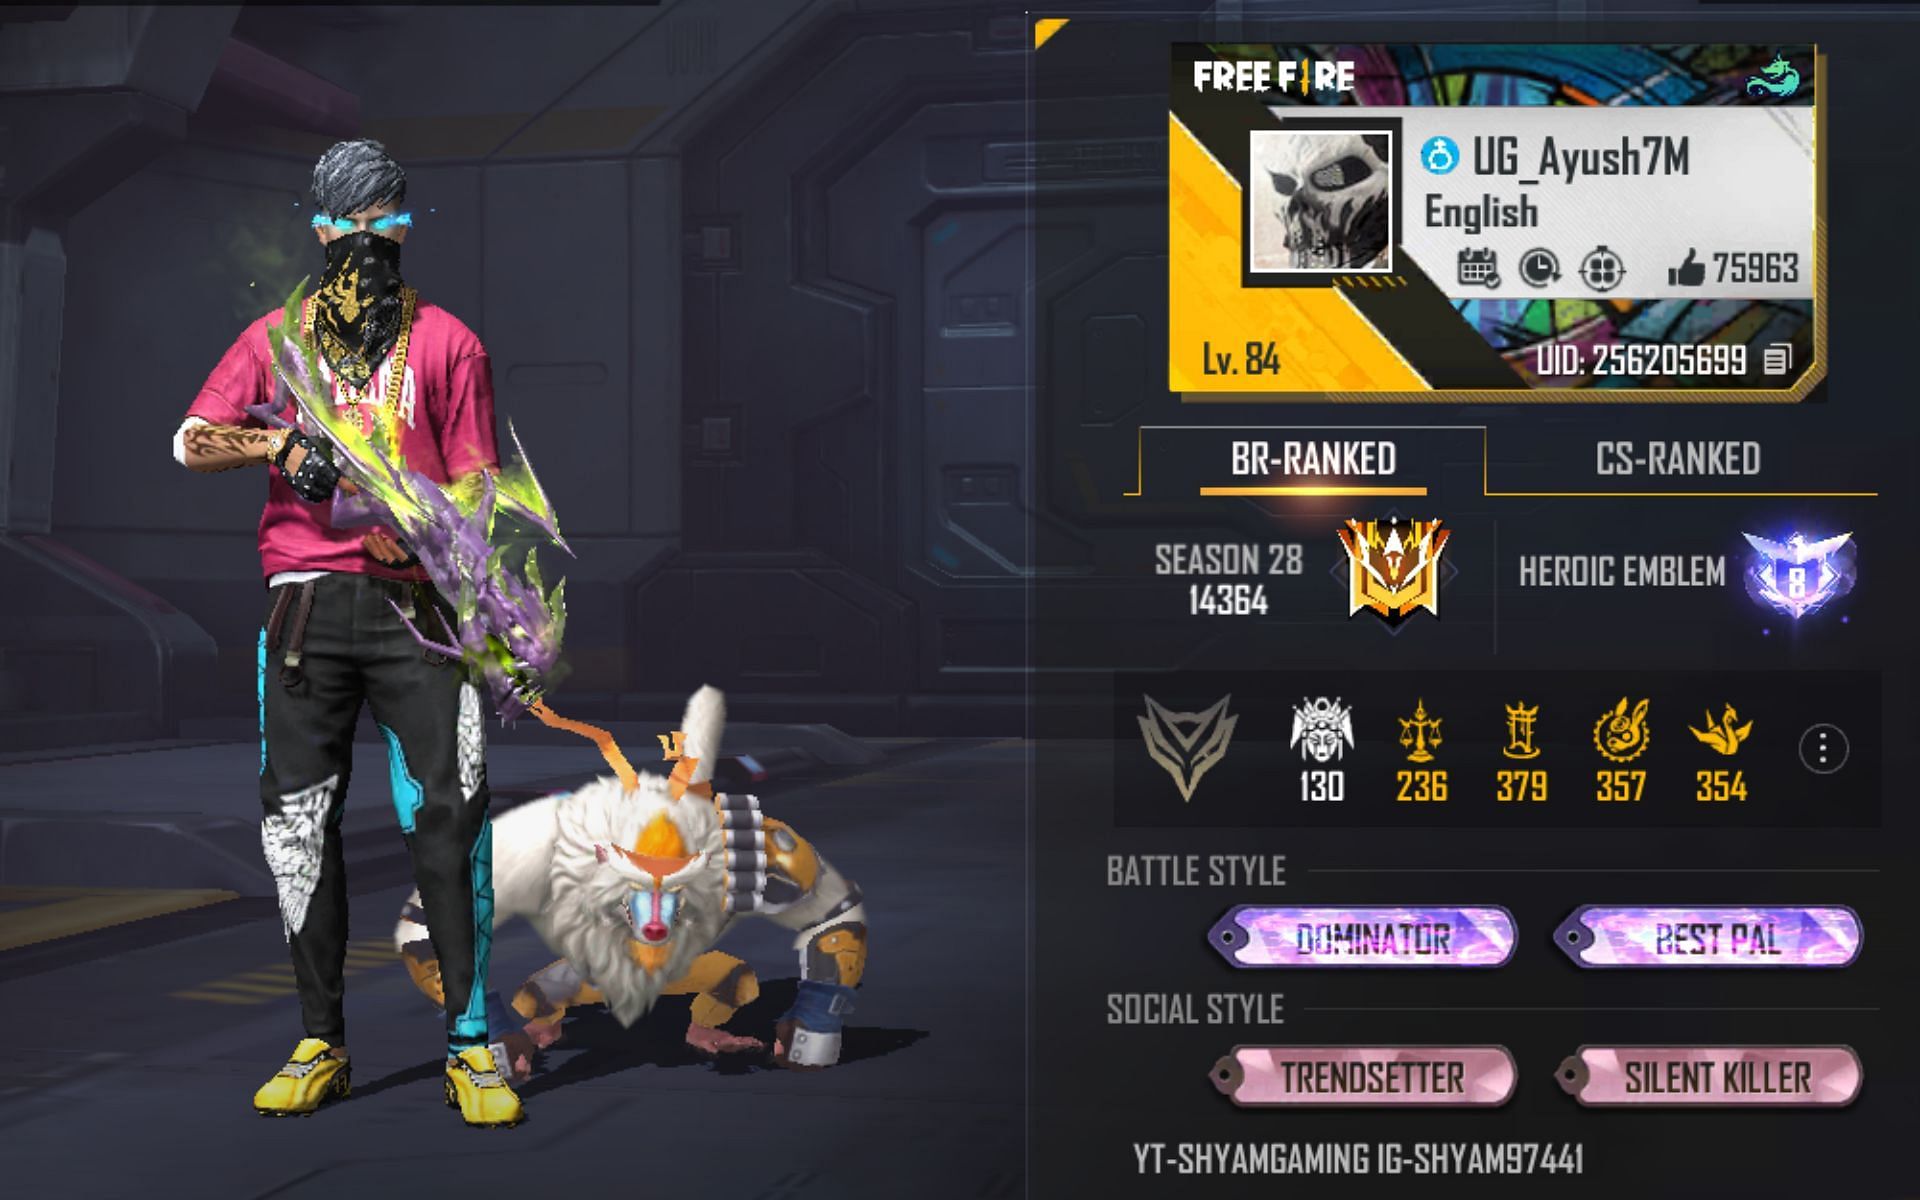 UnGraduate Gamer's Free Fire MAX ID, stats, rank, K/D ratio, and monthly  income in June 2022